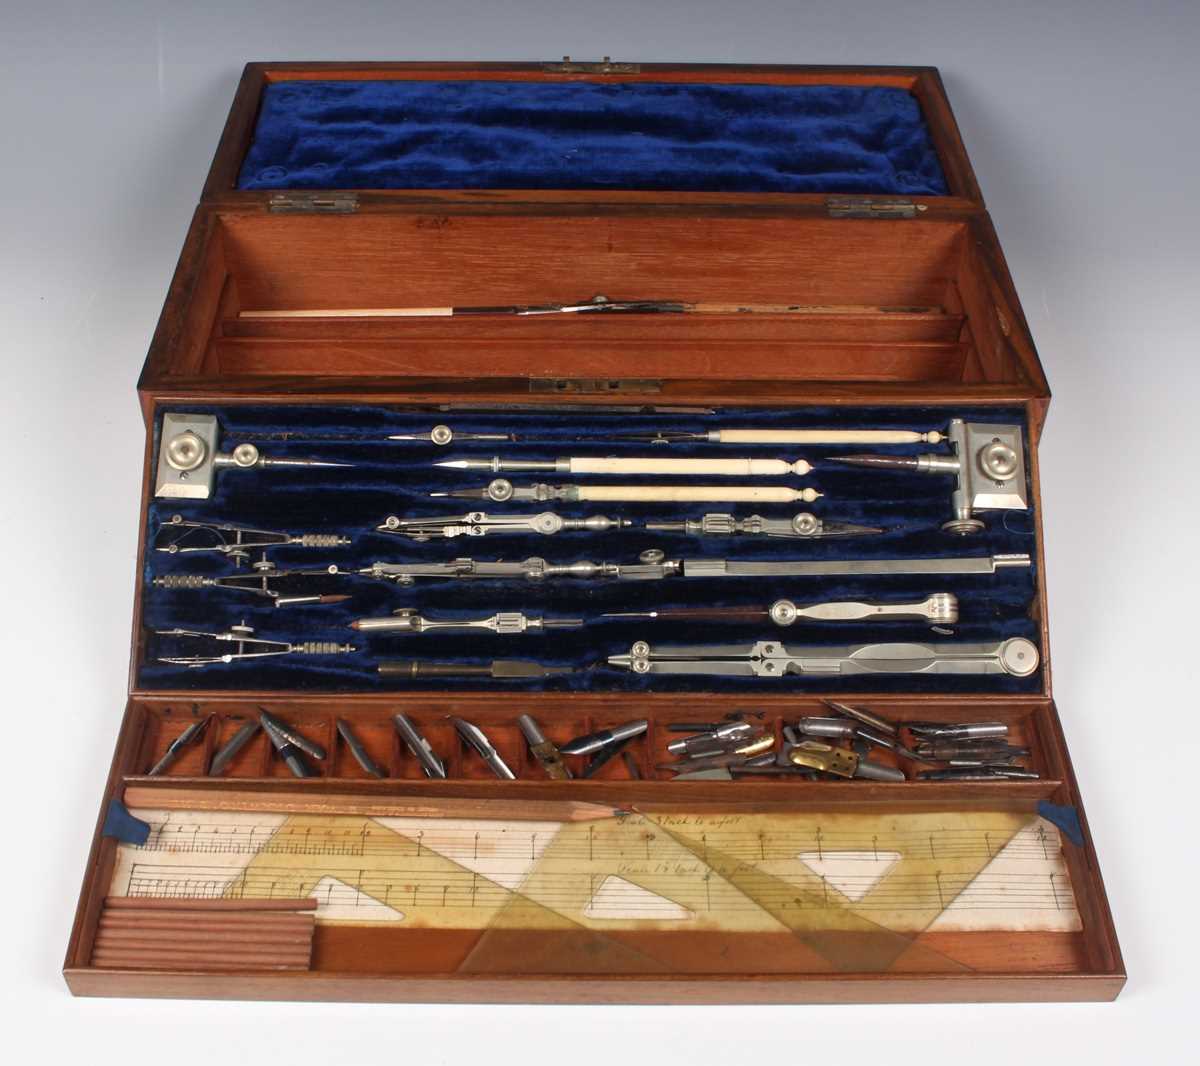 A late Victorian burr walnut drawing instrument box, fitted with two detachable trays containing